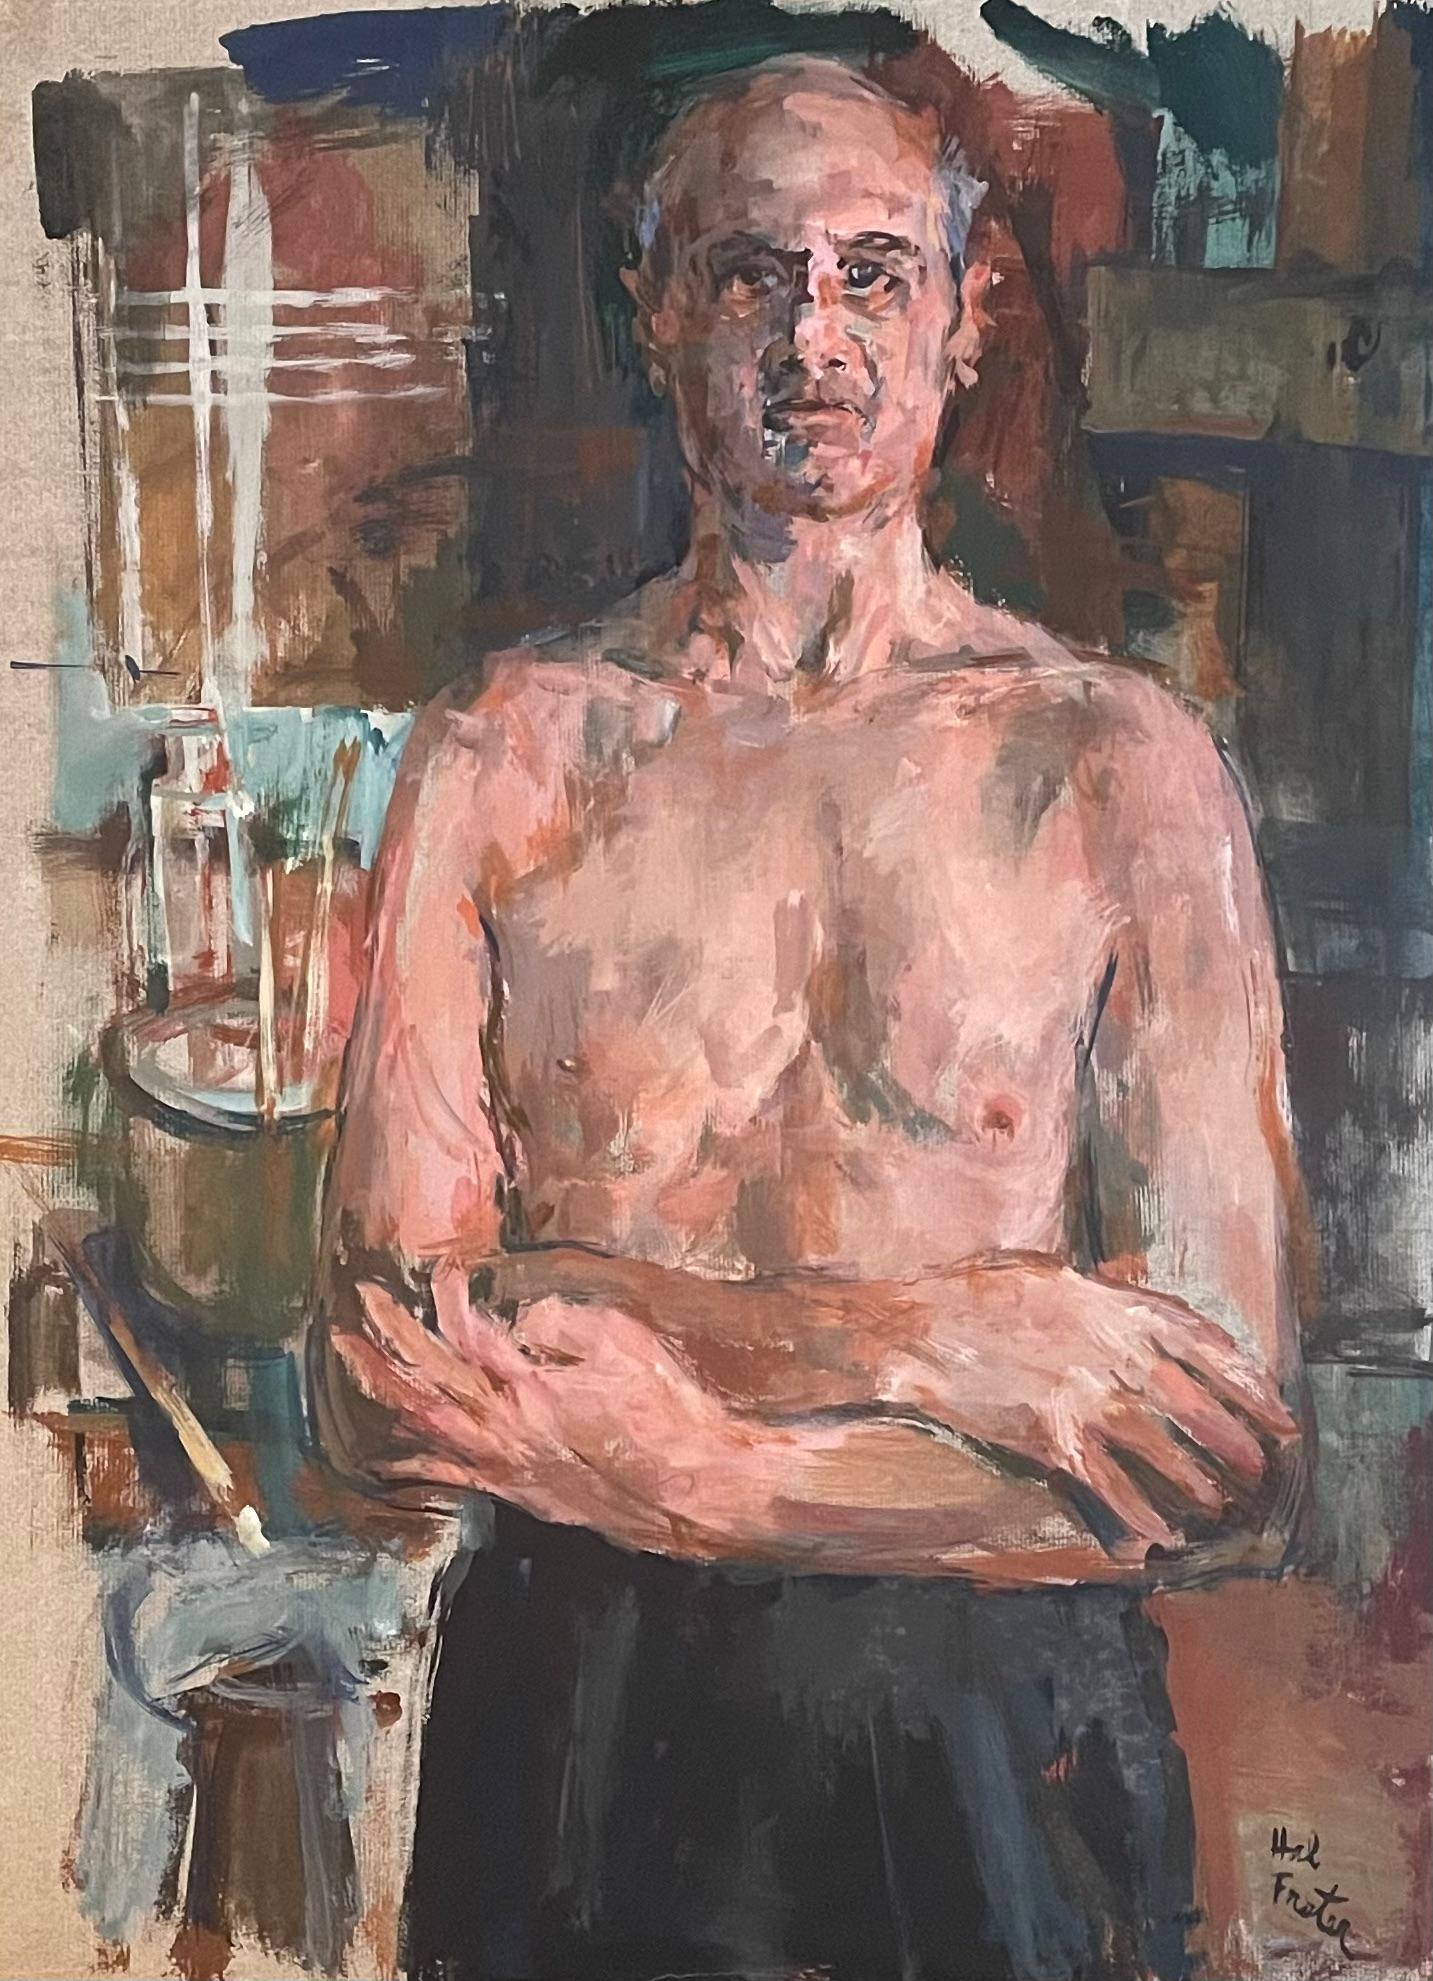 Hal Frater's "The Artist as a Young Man" is a striking oil on canvas that captures the essence of the artist himself, rendered in a raw, emotive style. The palette is earthy, with natural browns and creams contrasted against subdued blues and hints